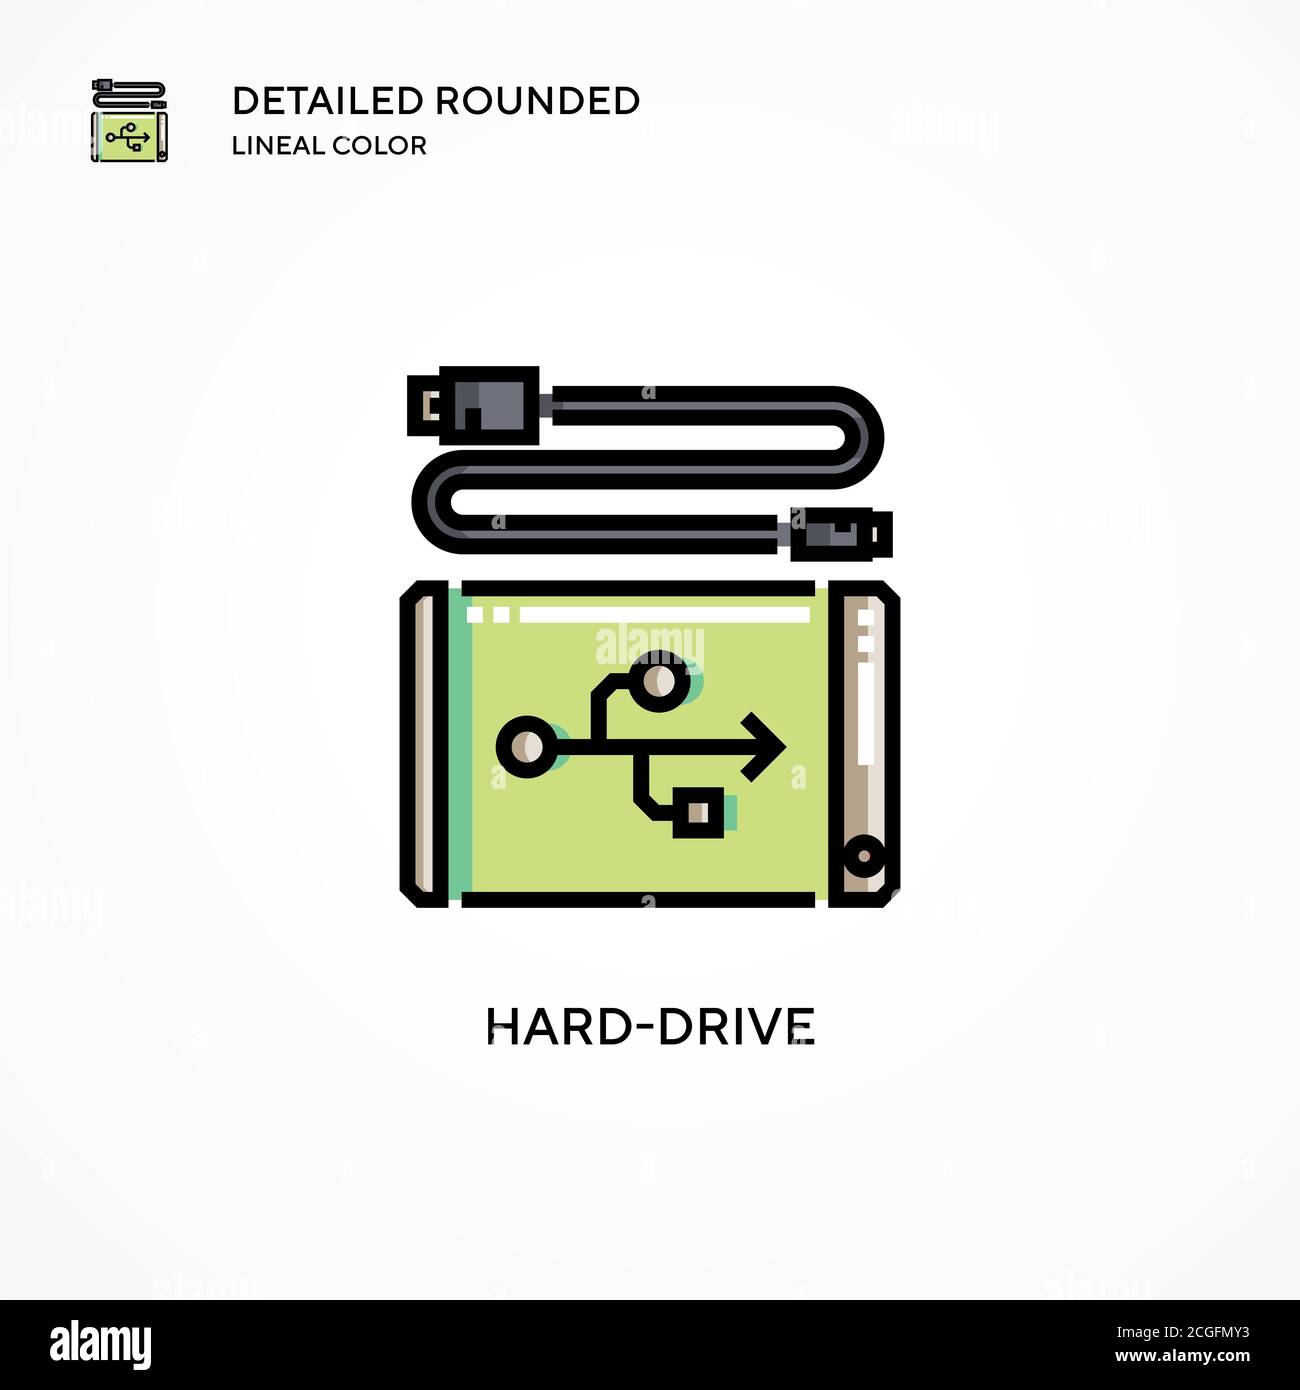 Hard-drive vector icon. Modern vector illustration concepts. Easy to edit and customize. Stock Vector